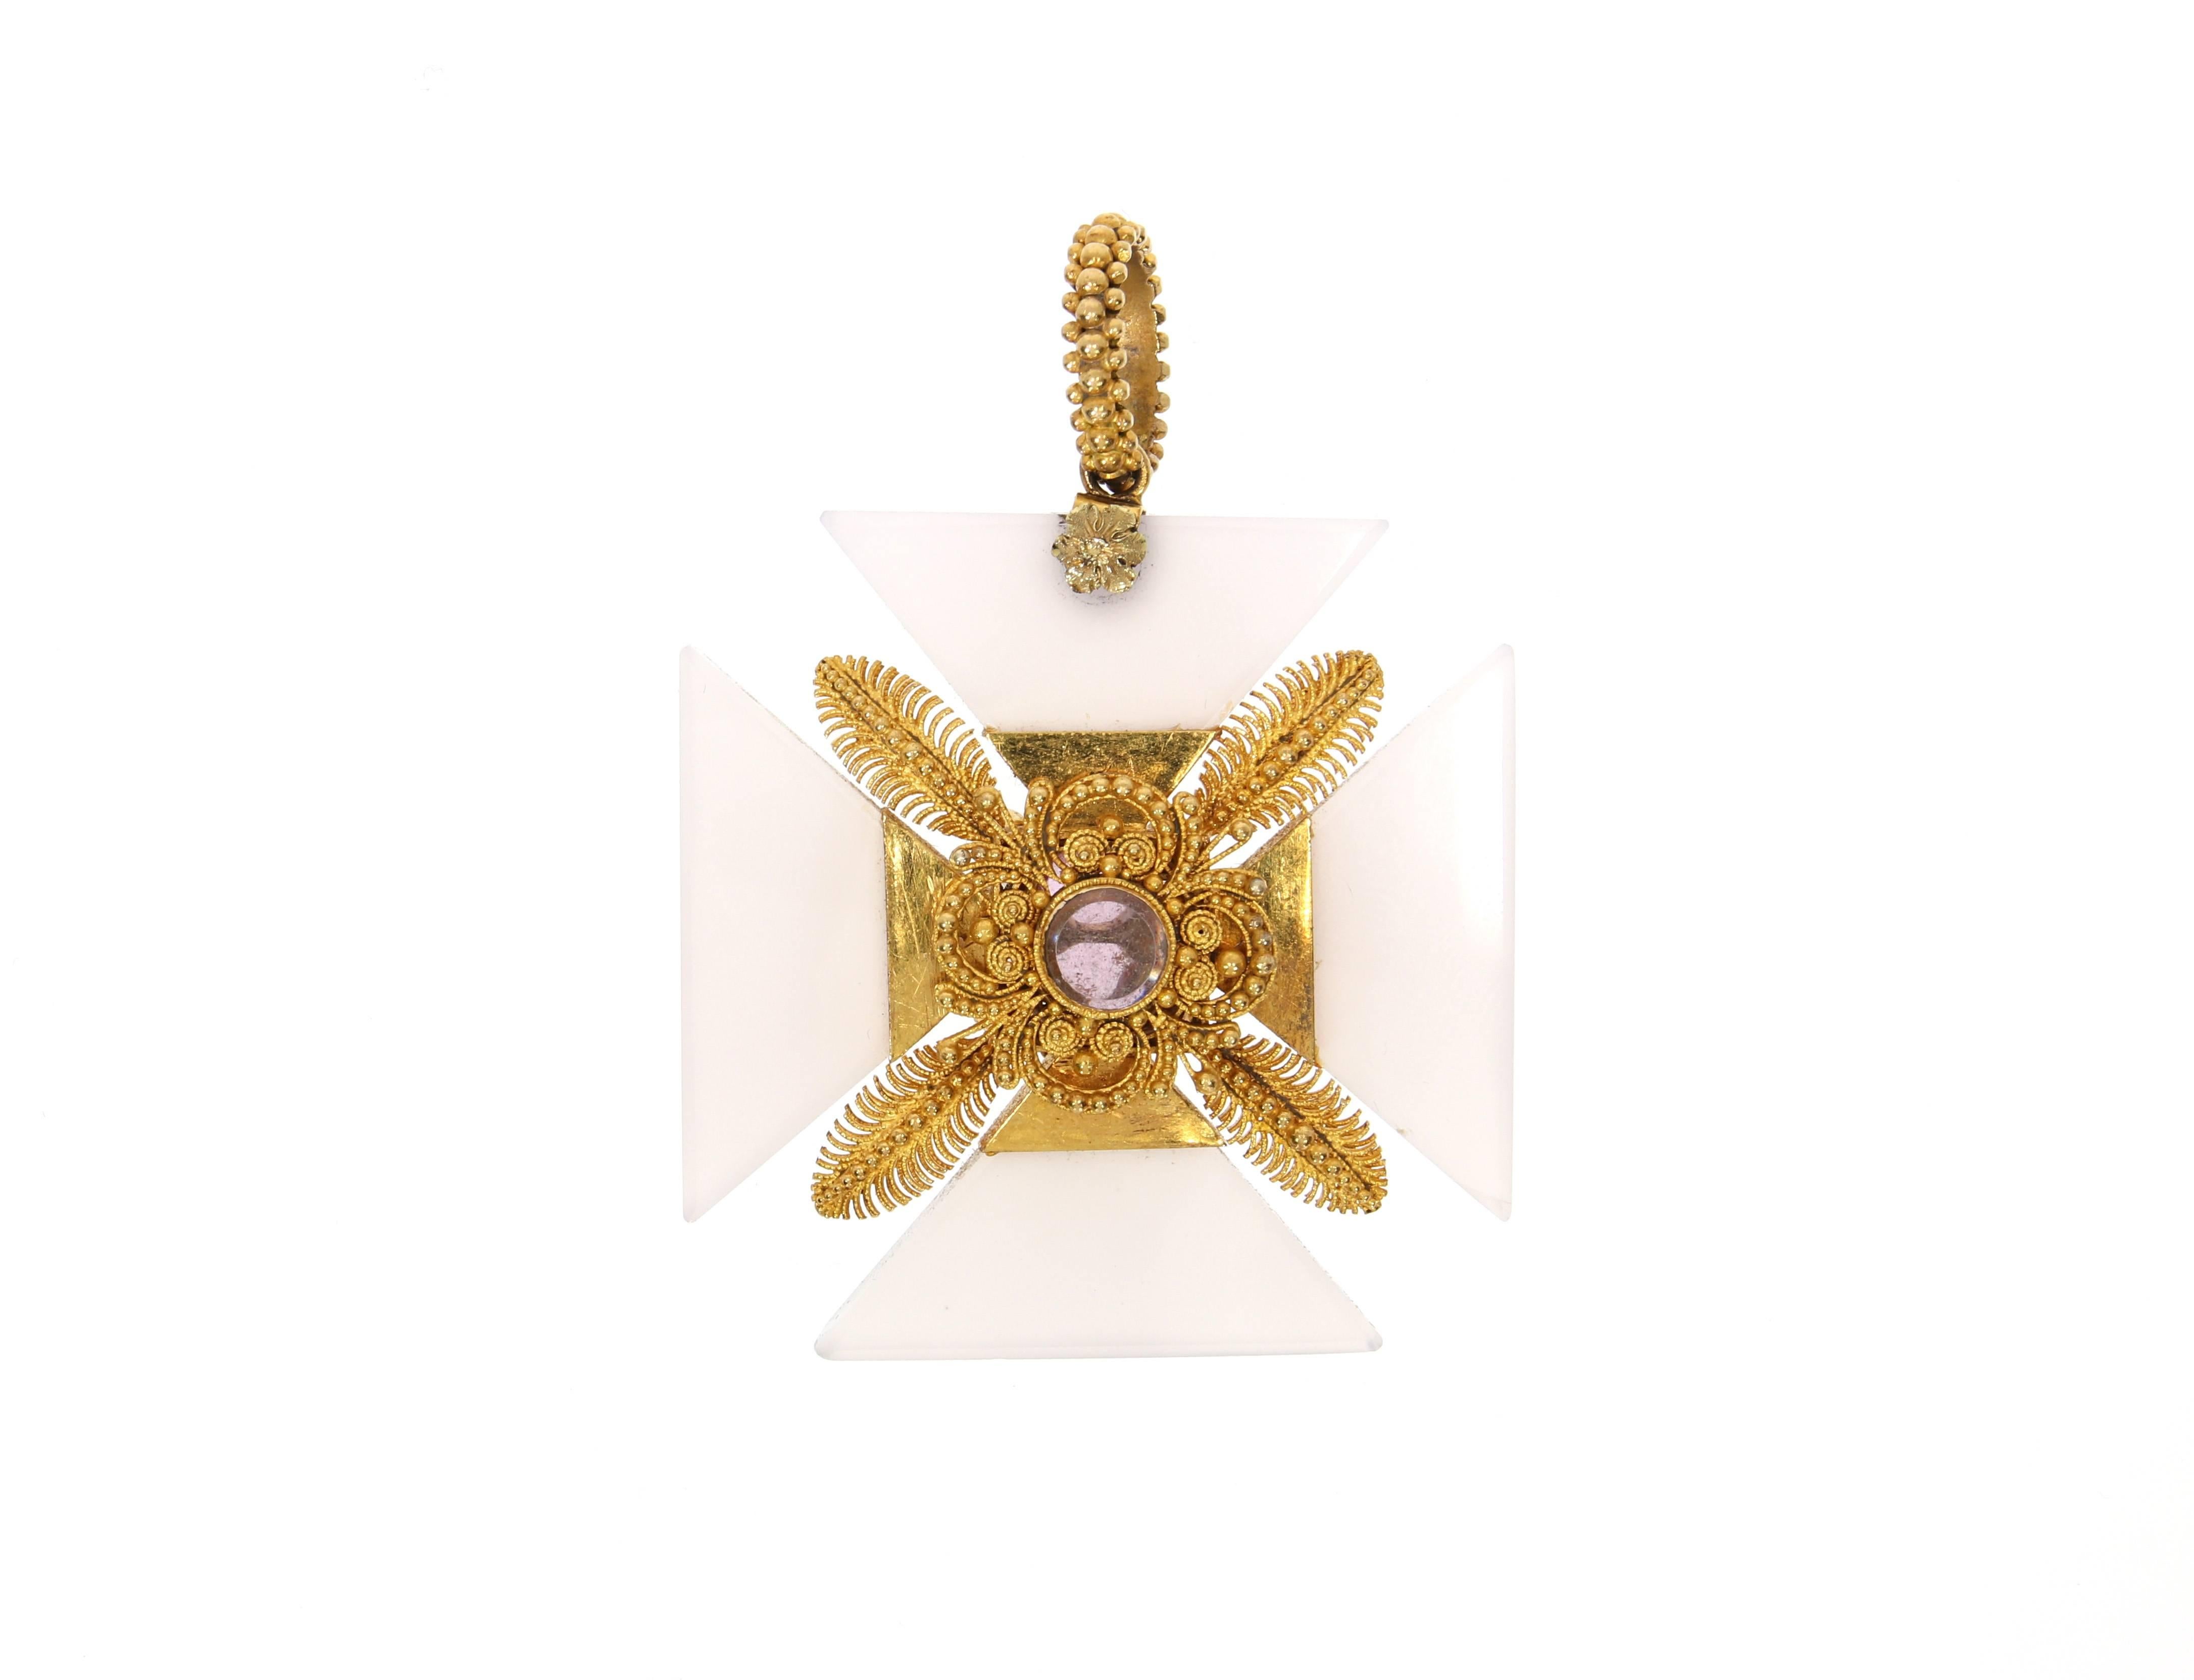 An enchanting Maltese cross pendant from the early 19th century. It is made from carved milky chalcedony. To the center, the cross is filigrain granulated in 14 Karats/ 18 Karats gold plated yellow gold- on both sides. A pink topaz, surrounded by 4